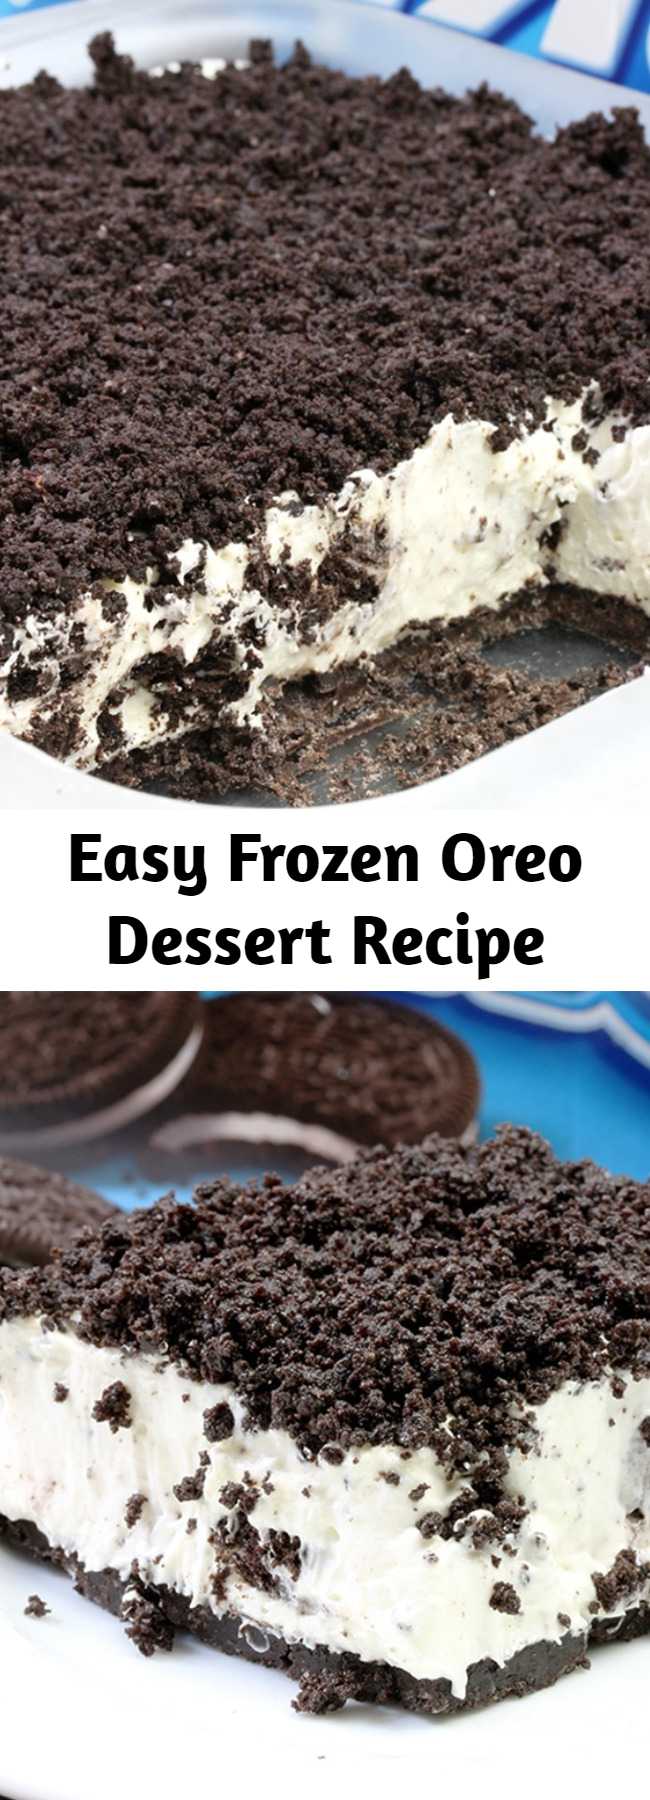 Easy Frozen Oreo Dessert Recipe - This Easy Frozen Oreo Dessert is light, frozen summer dessert… so easy to prepare – just perfect for Oreo cookie fans. One of my favorite frozen desserts. The first layer is made of Oreo cookies and butter, than comes frozen layer of cream cheese, sugar, heavy cream, condensed milk, vanilla and crushed Oreo cookies with Oreo crumbs on the top. Yummy!!!